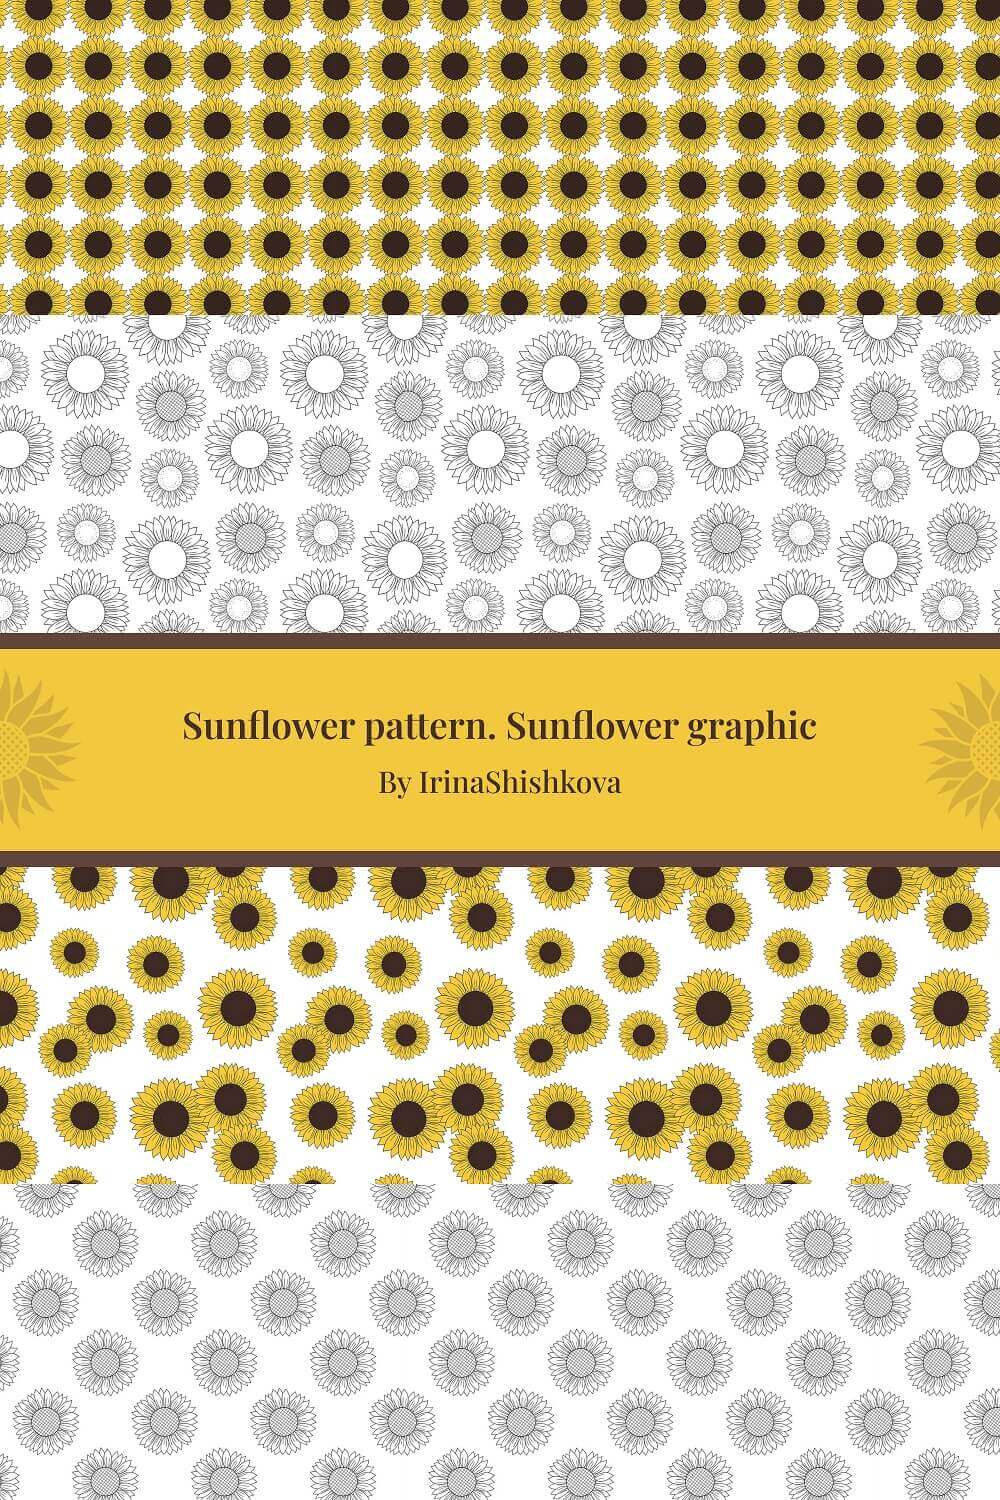 Four horizontal lines of different colors with sunflowers seamless pattern.